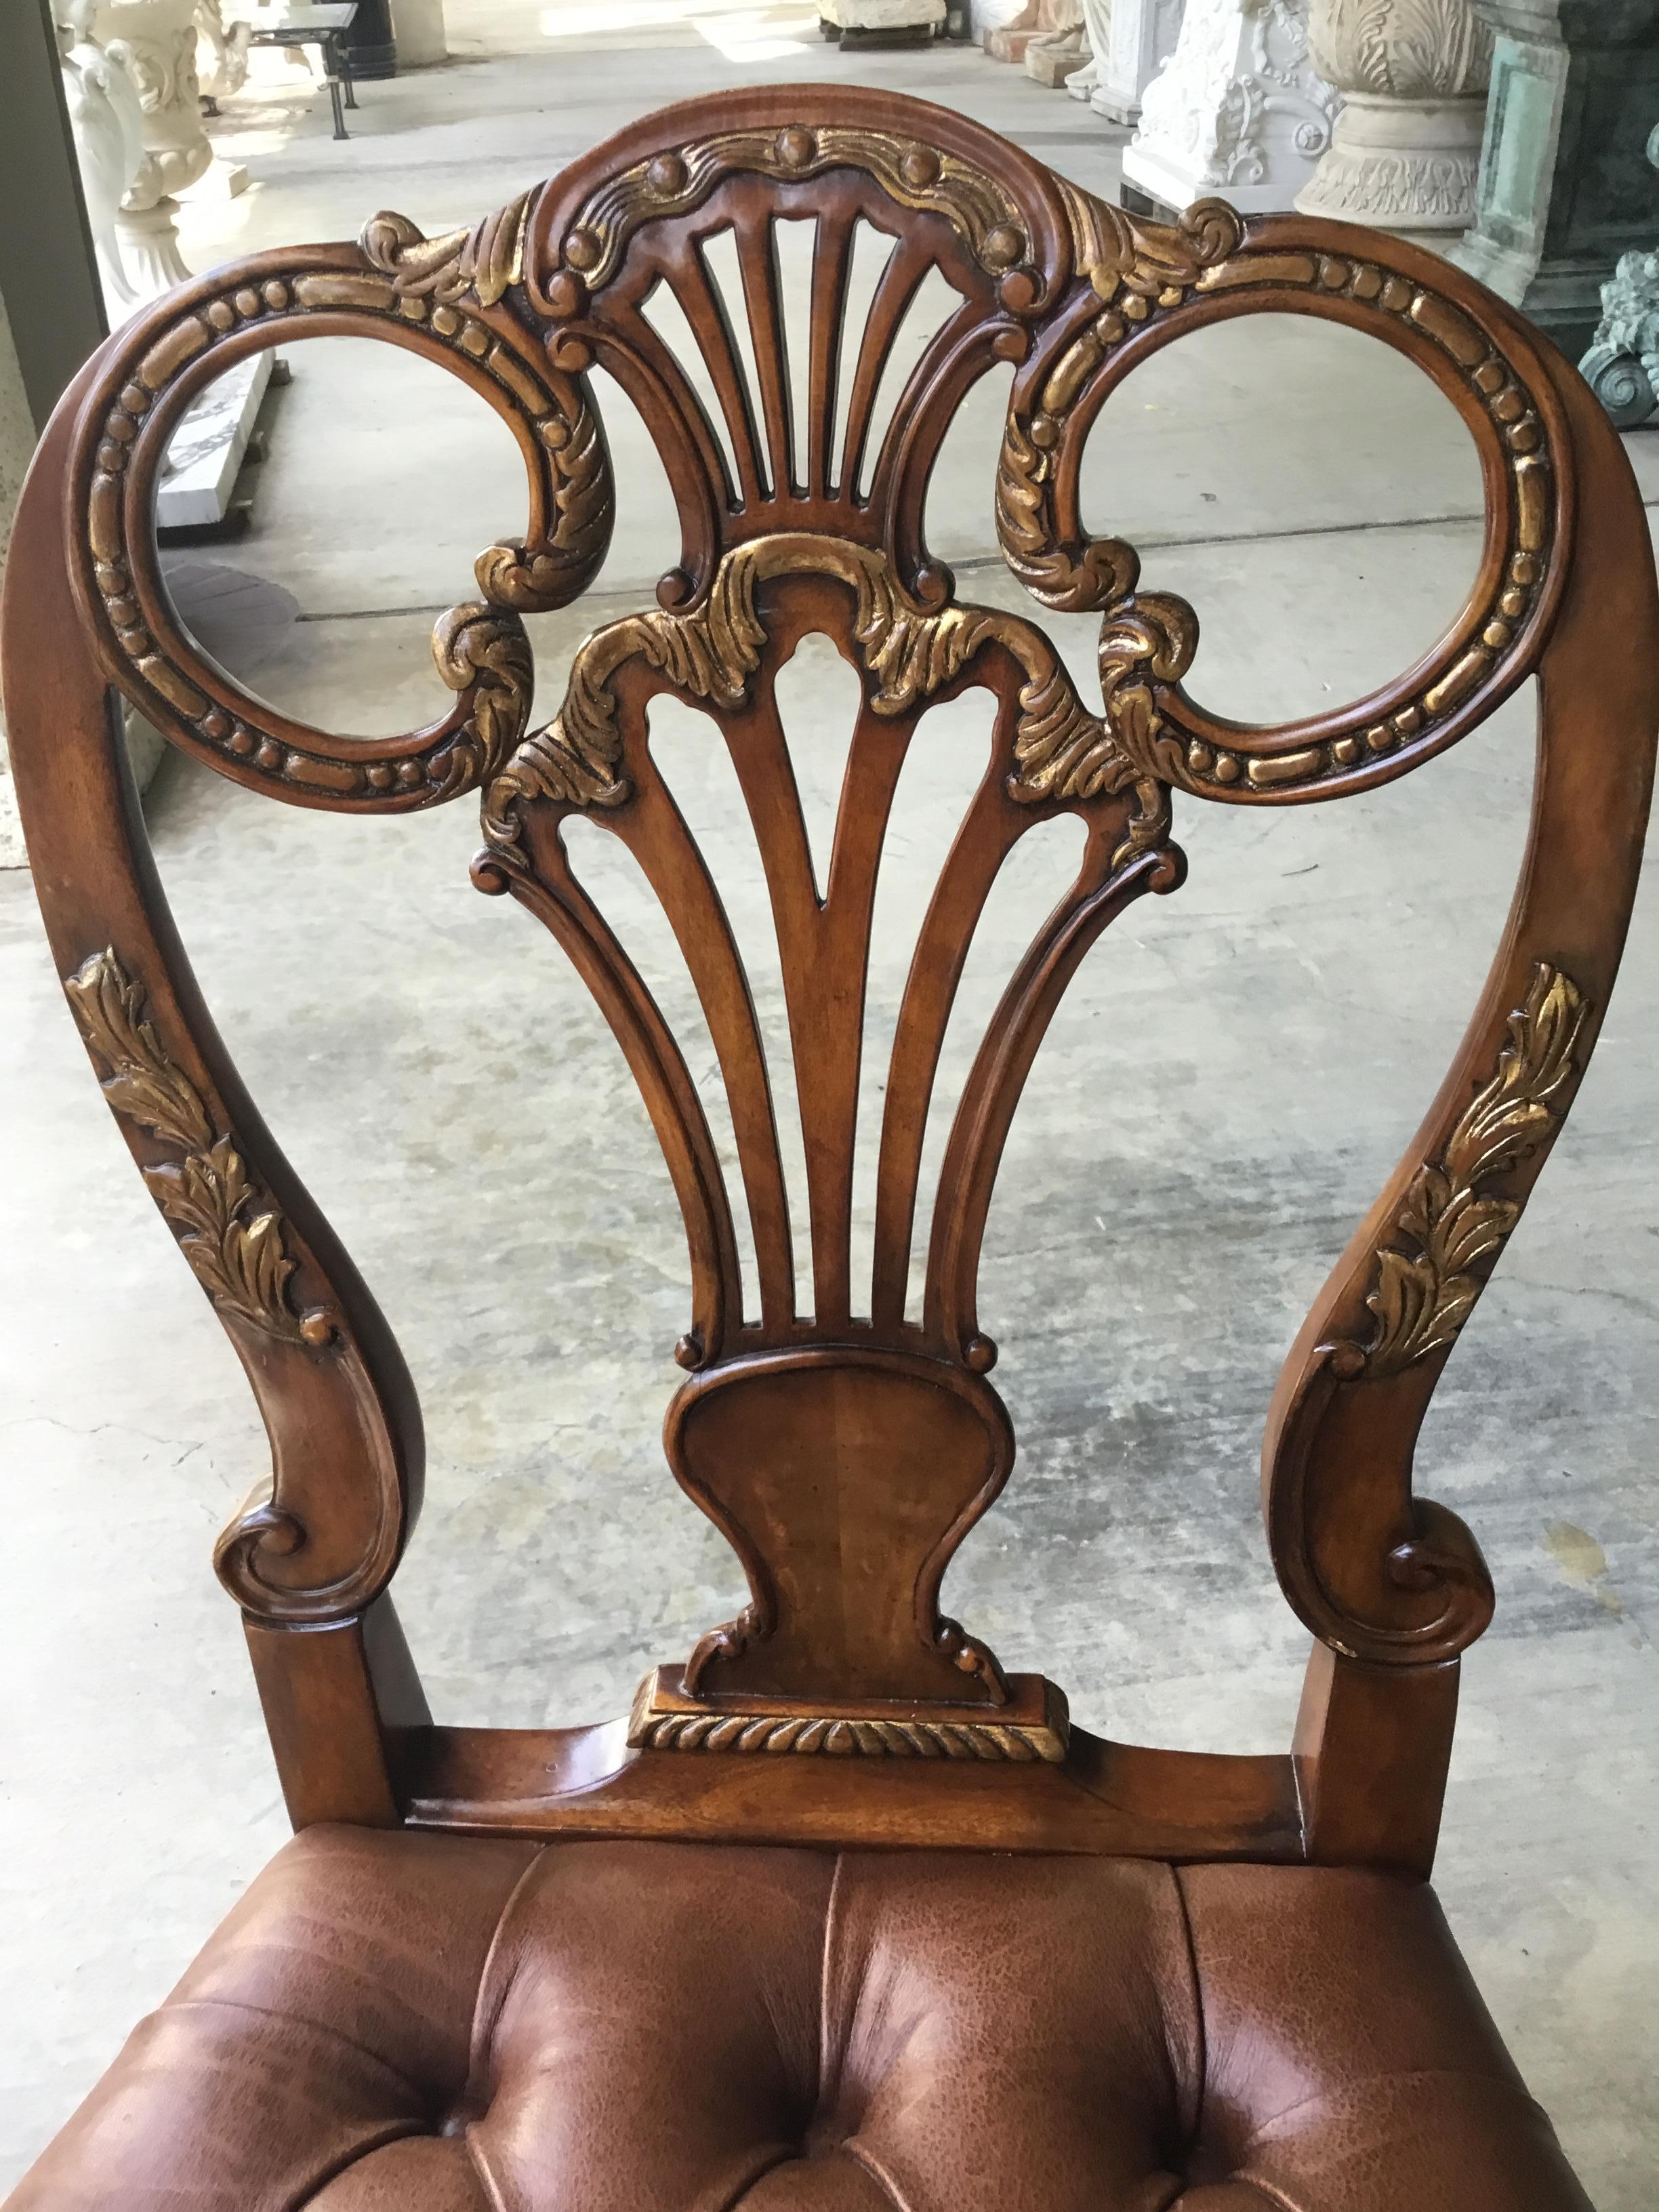 Set comprised of two arm chairs and ten side chairs. Each
Having finely carved splat backs and shaped crest rails.
The front legs of cabriole form with acanthus leaf carved knees
And whorl feet. Button tufted leather upholstered seats with brass